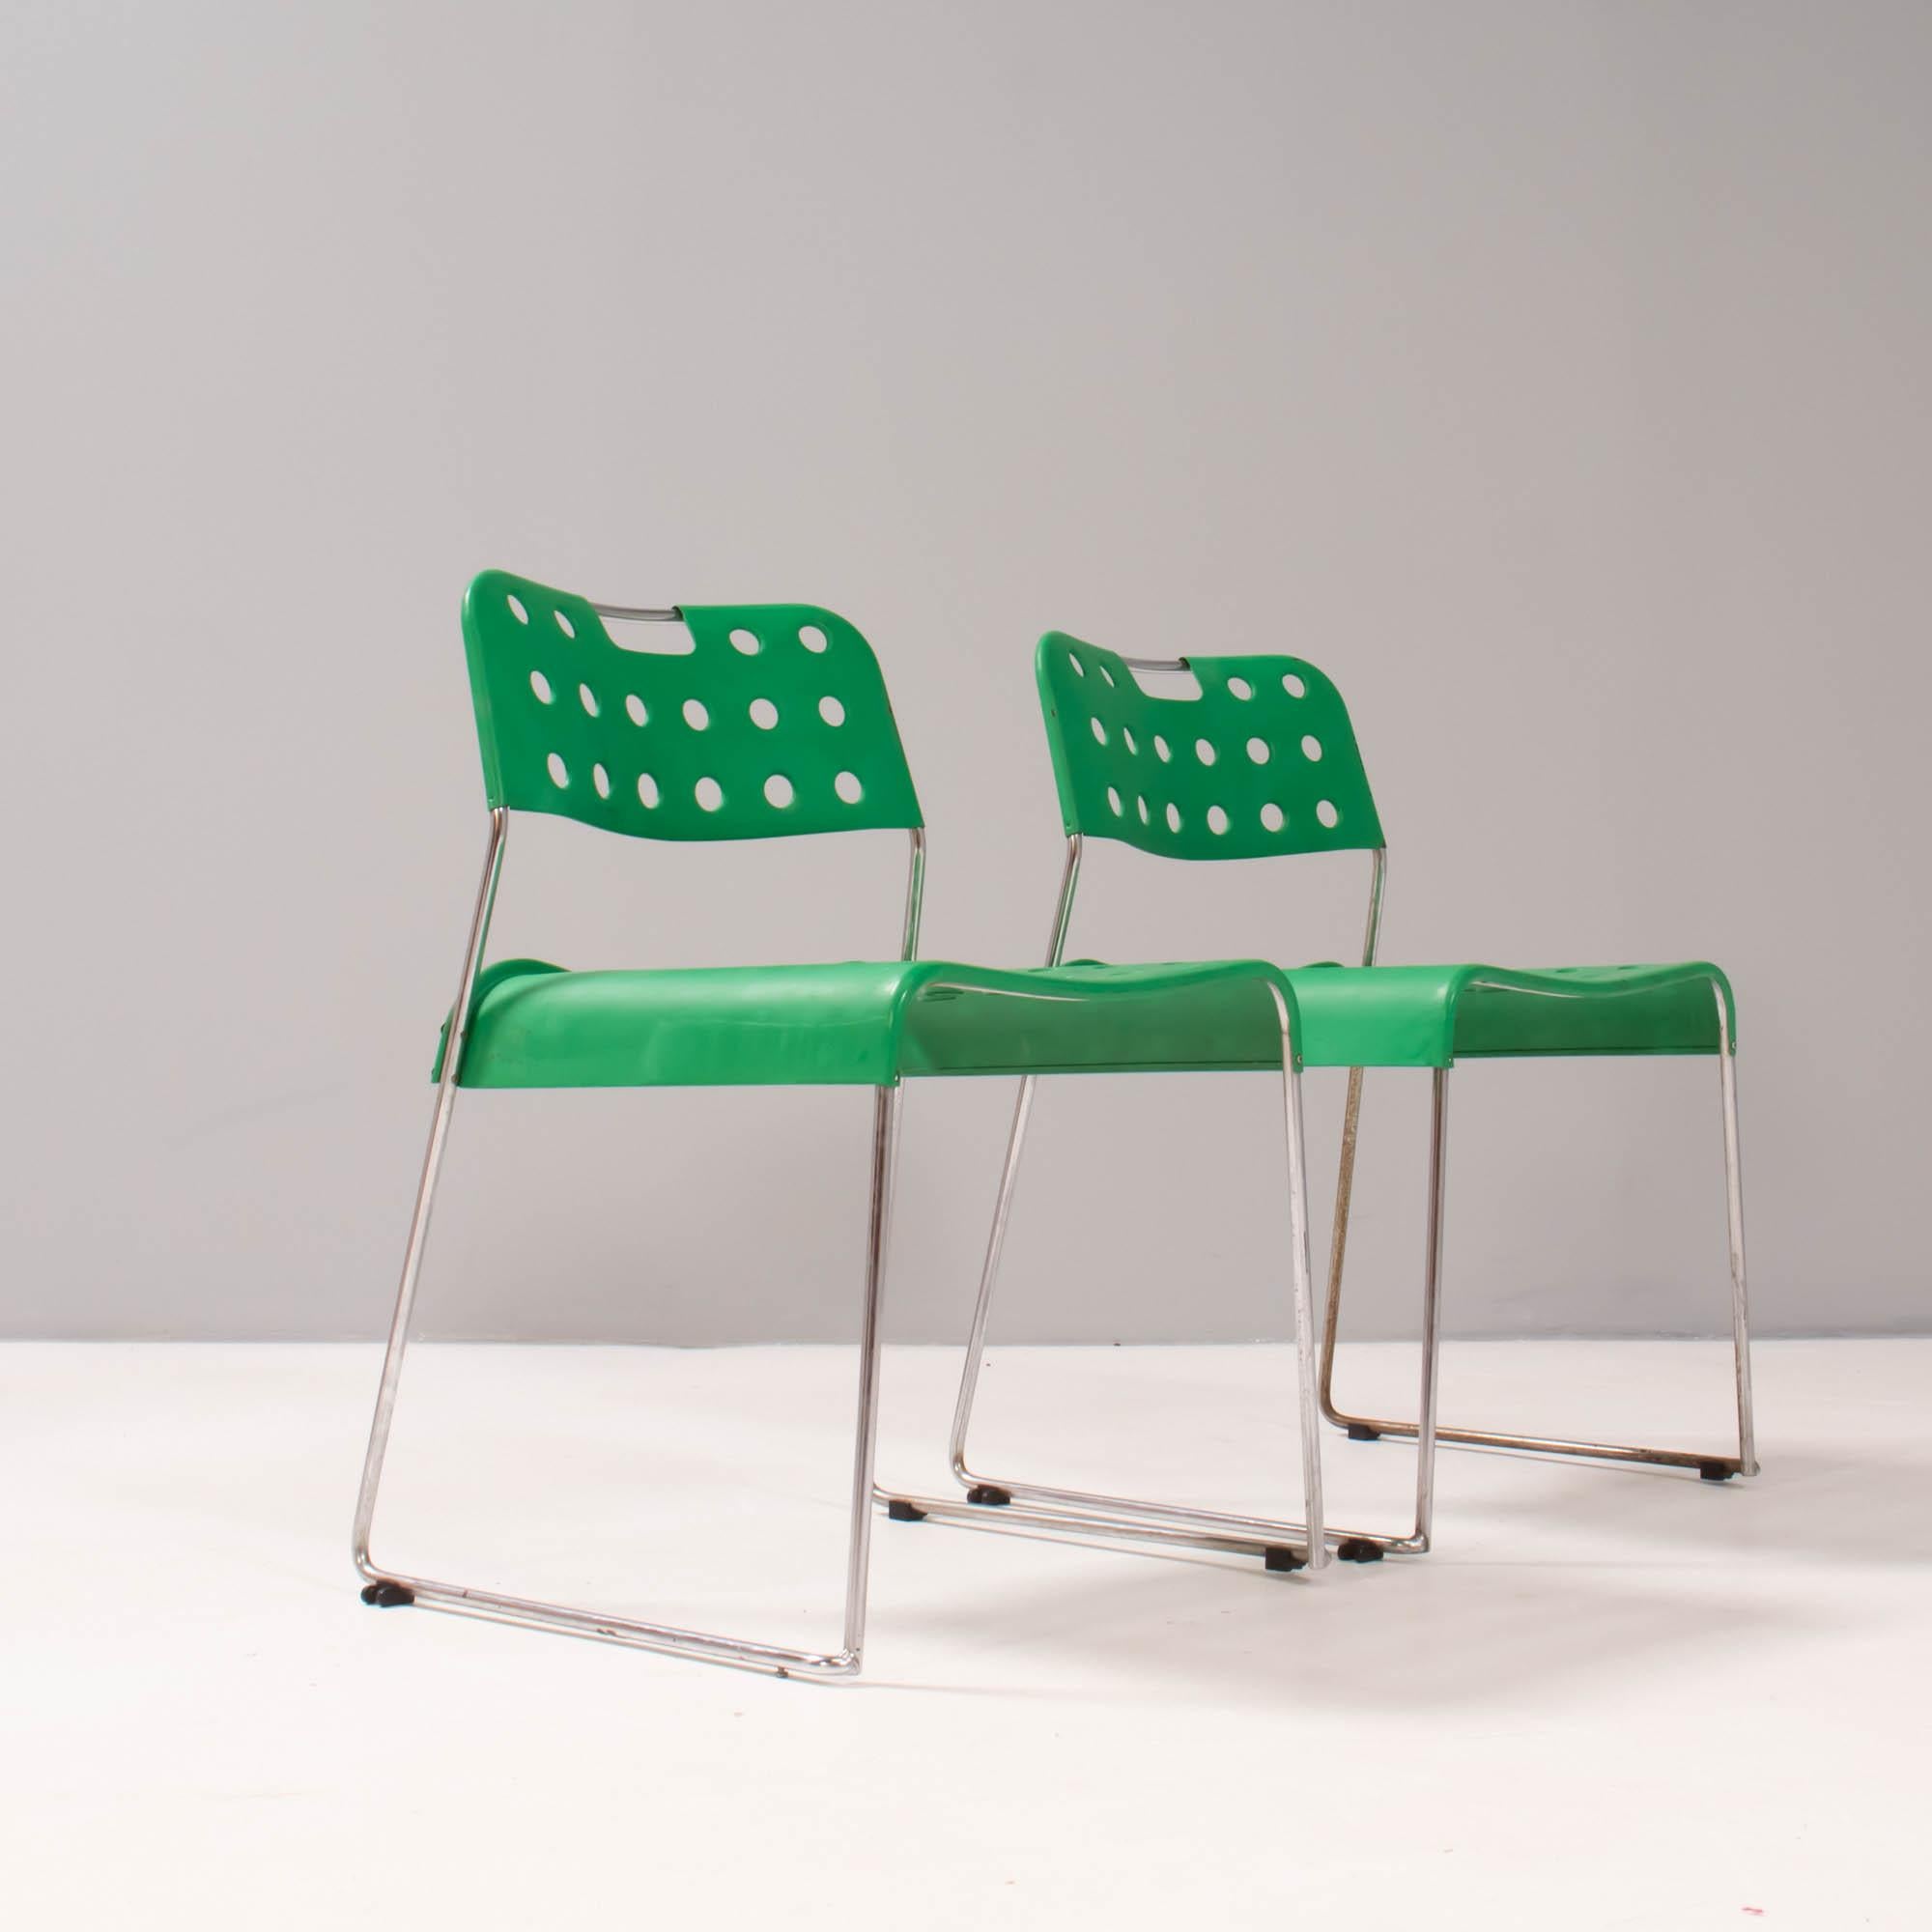 Originally designed by Rodney Kinsman in 1972 for OMK, the Omstak chair has since become an icon of British design.

An example from the beginning of the high-tech era of modern furniture design, the Omstak chairs are constructed from perforated